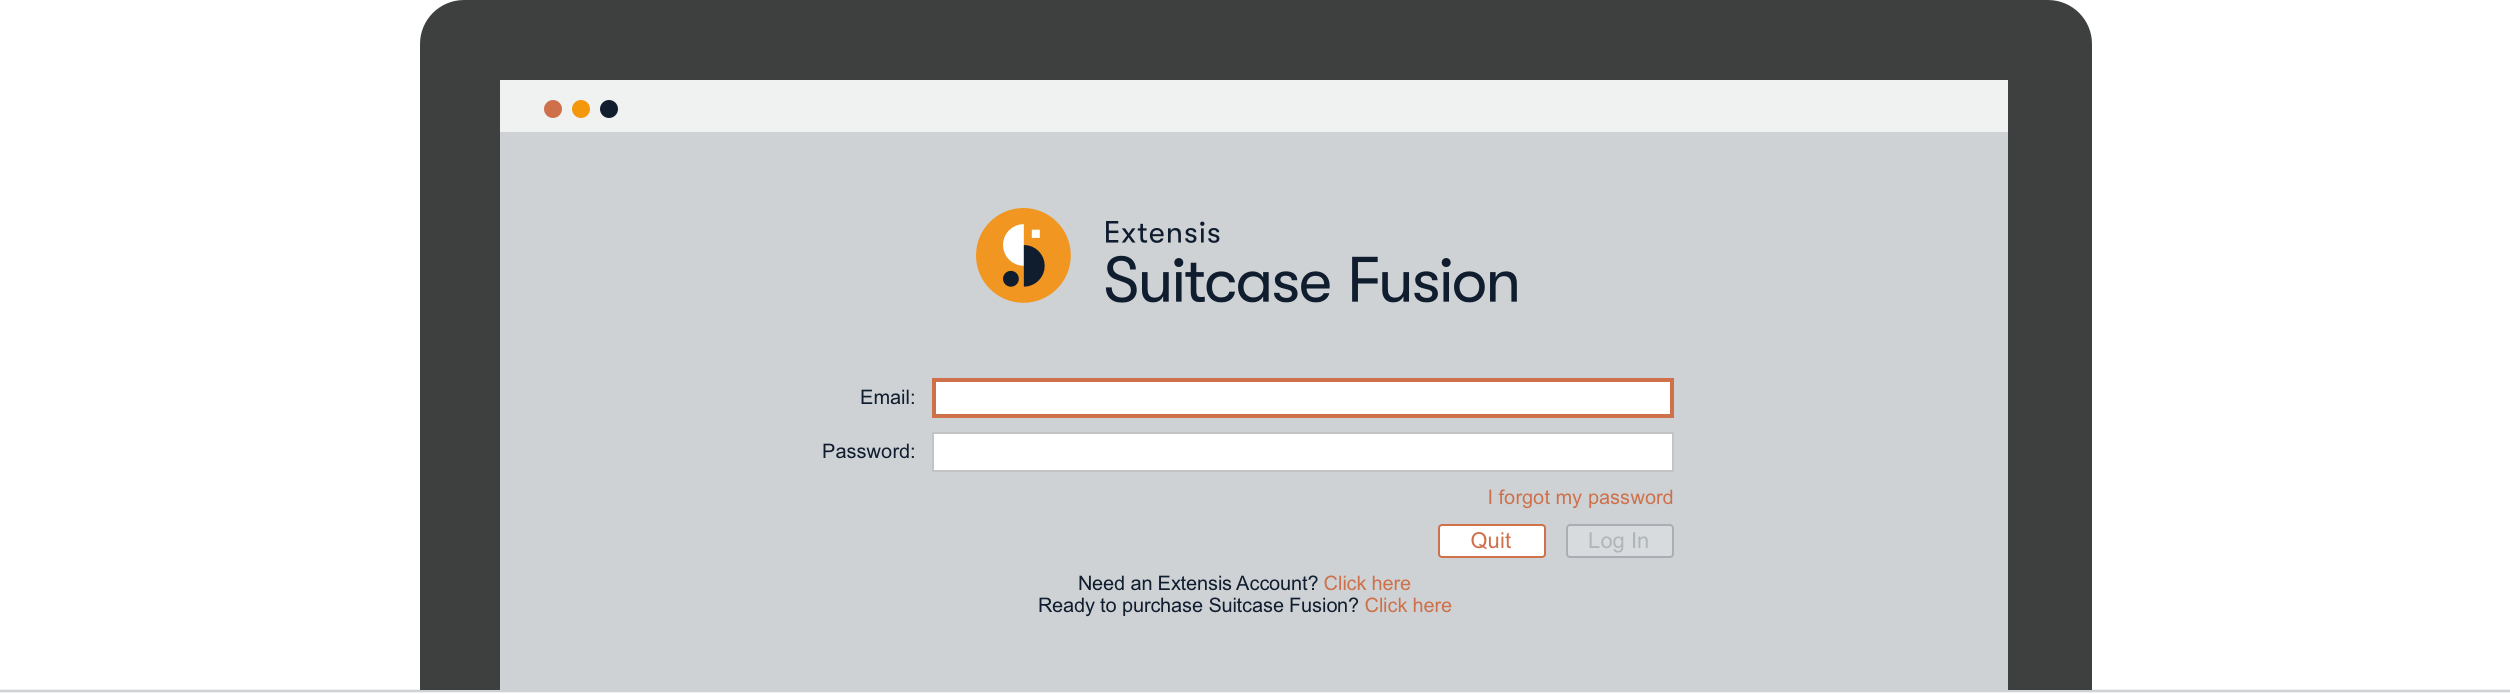 collect fonts for output suitcase fusion 6 greyed out